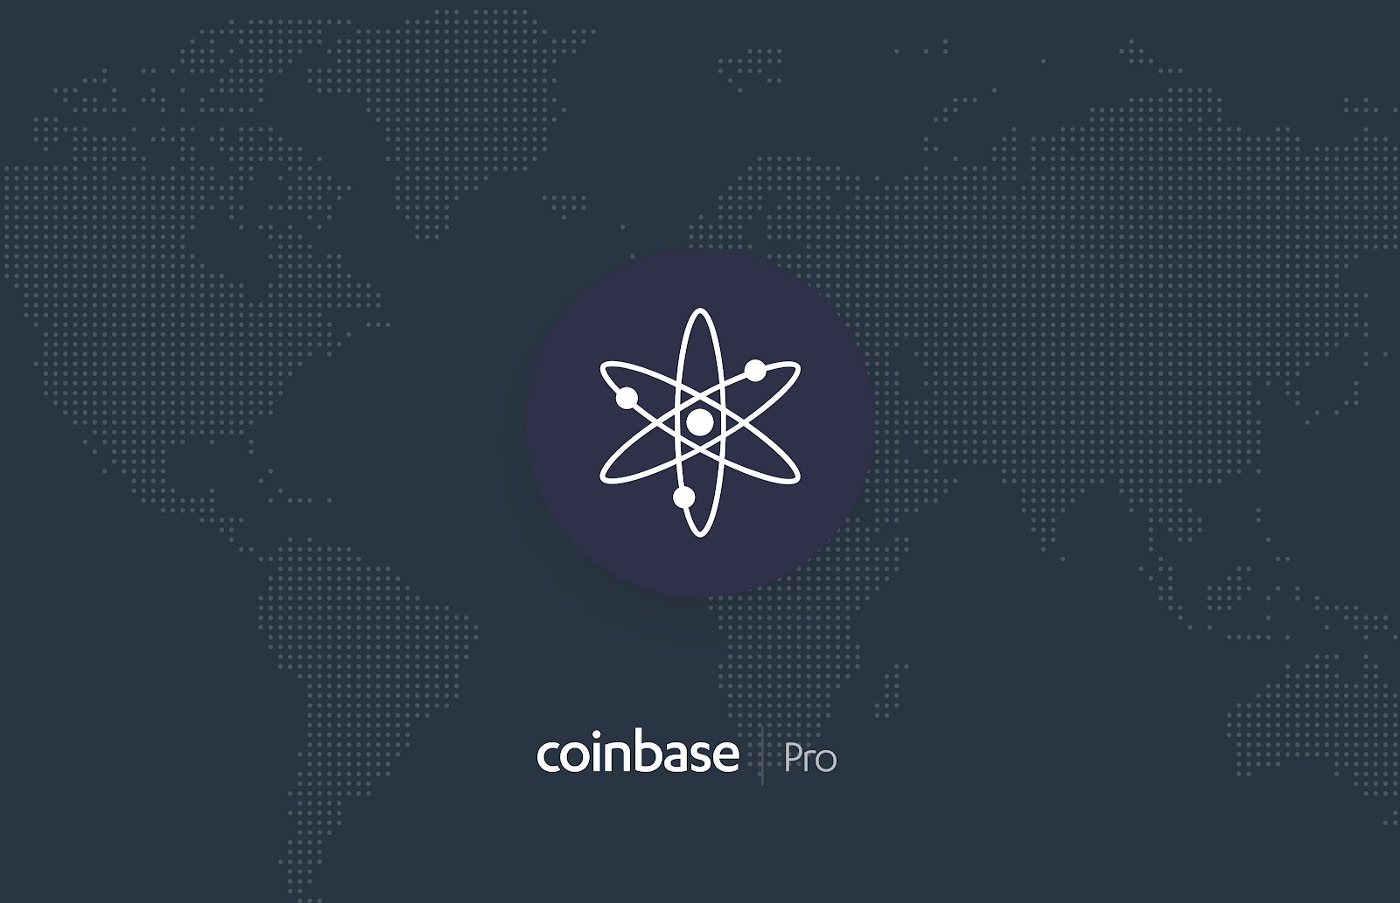 Cosmos (ATOM) is now available on Coinbase Pro